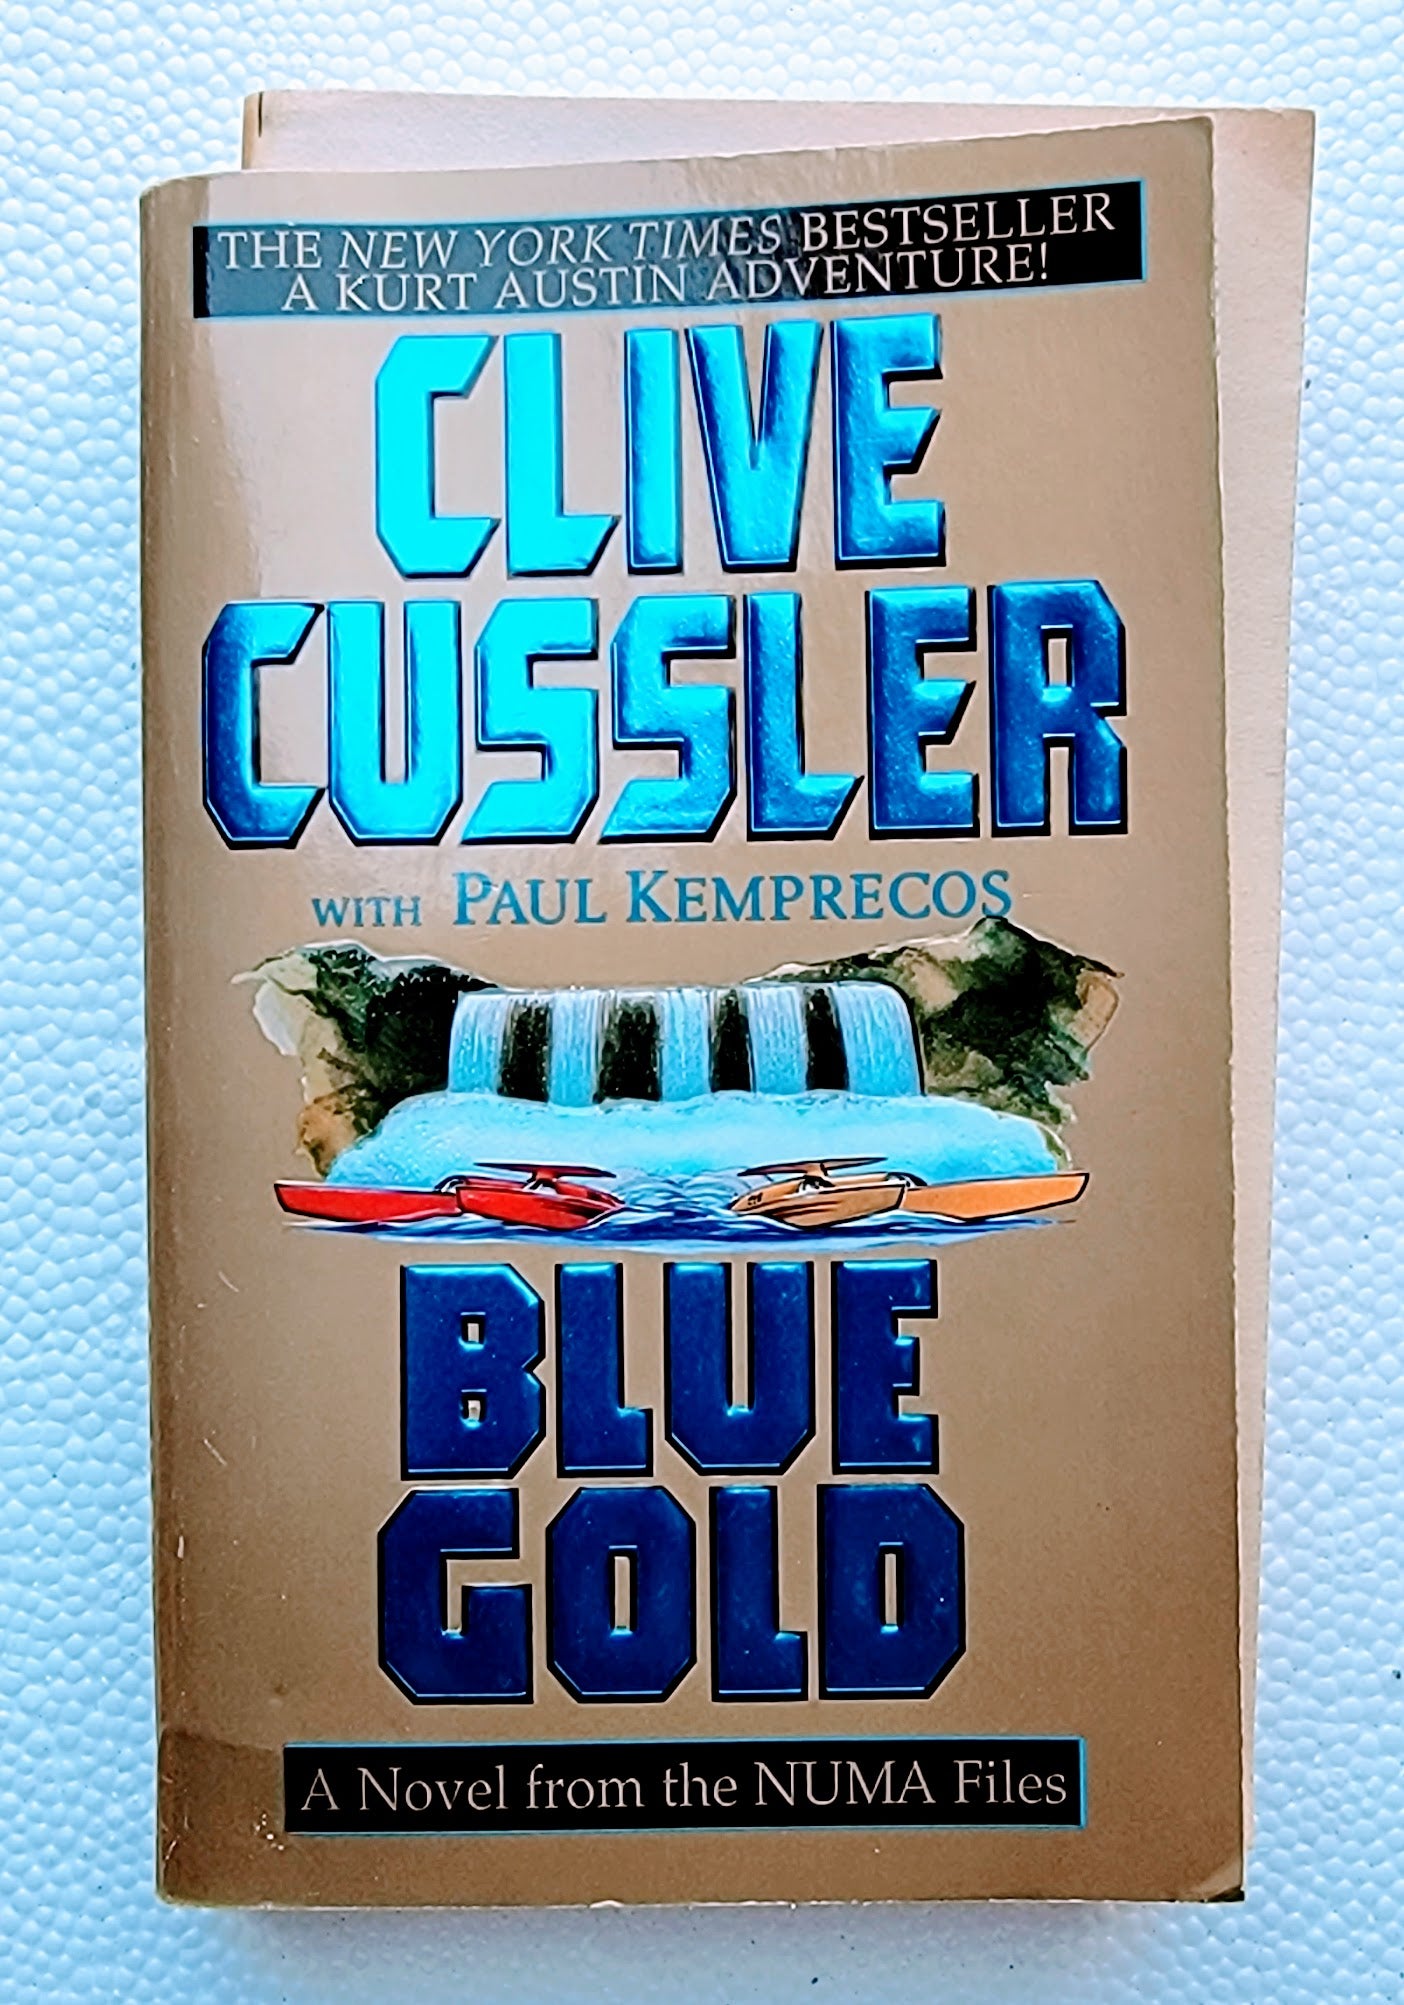 Blue Gold: A Novel from the NUMA Files by Clive Cussler (Paperback Edition)  Xclusive Collectibles   